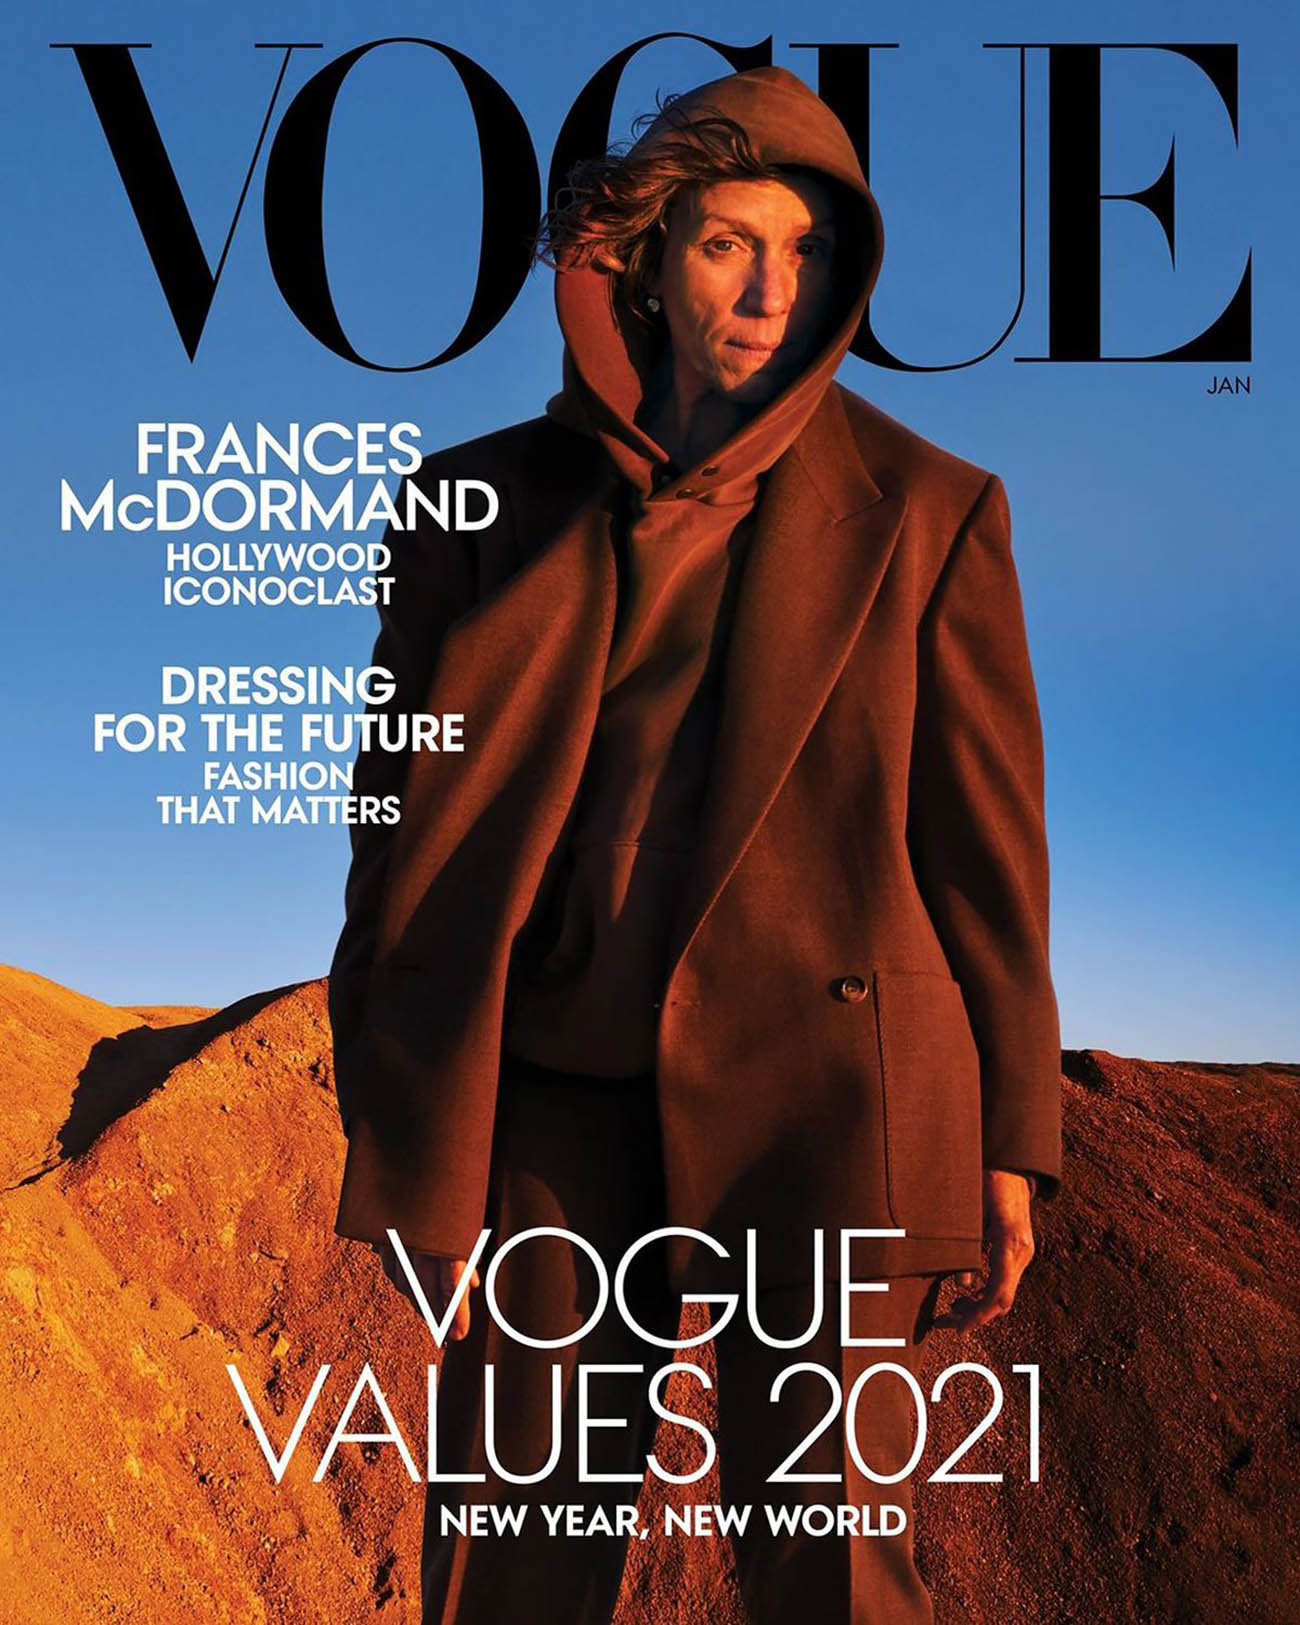 Vogue US January 2021 covers by Annie Leibovitz fashionotography